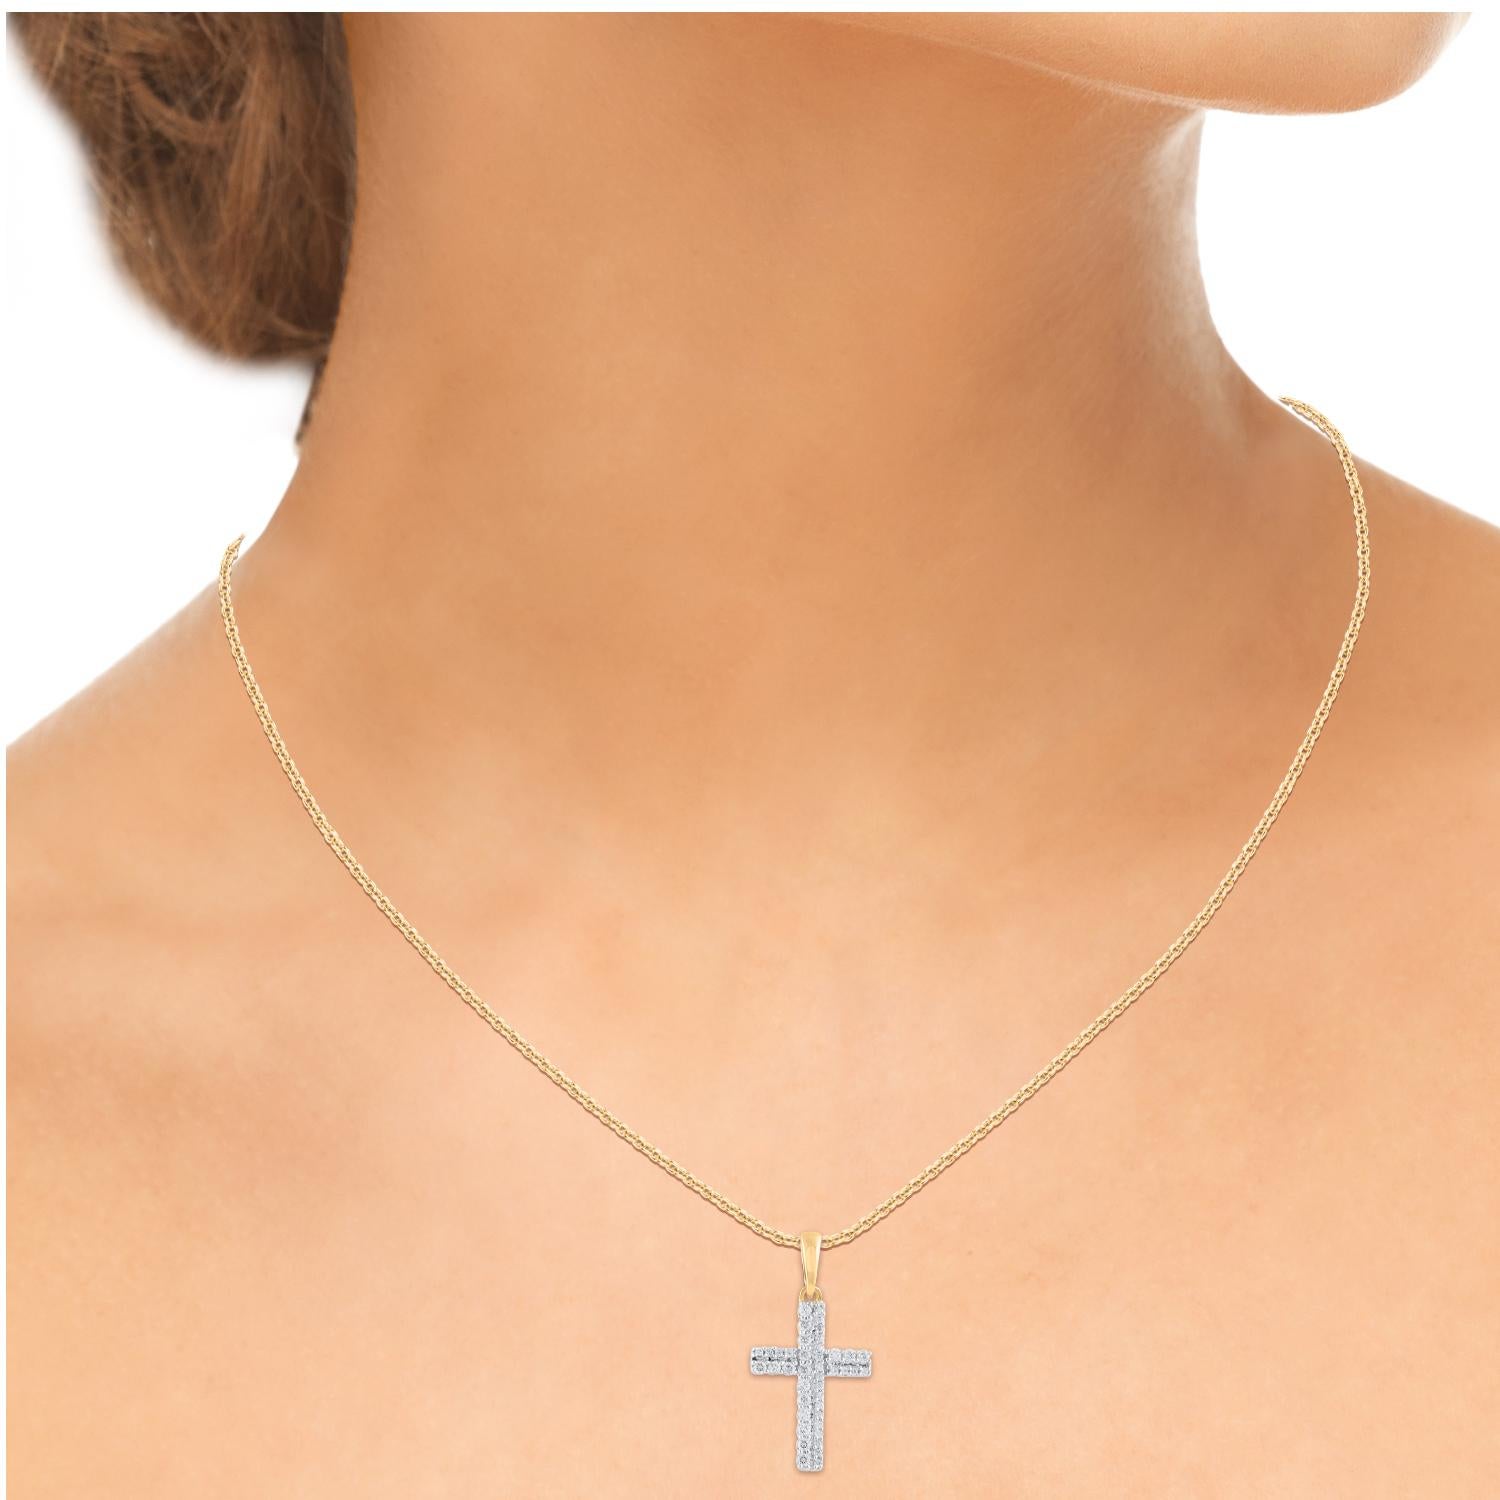 TJD 0.20 Carat Round Cut Diamond Cross Pendant Necklace in 14 Karat Yellow Gold In New Condition For Sale In New York, NY